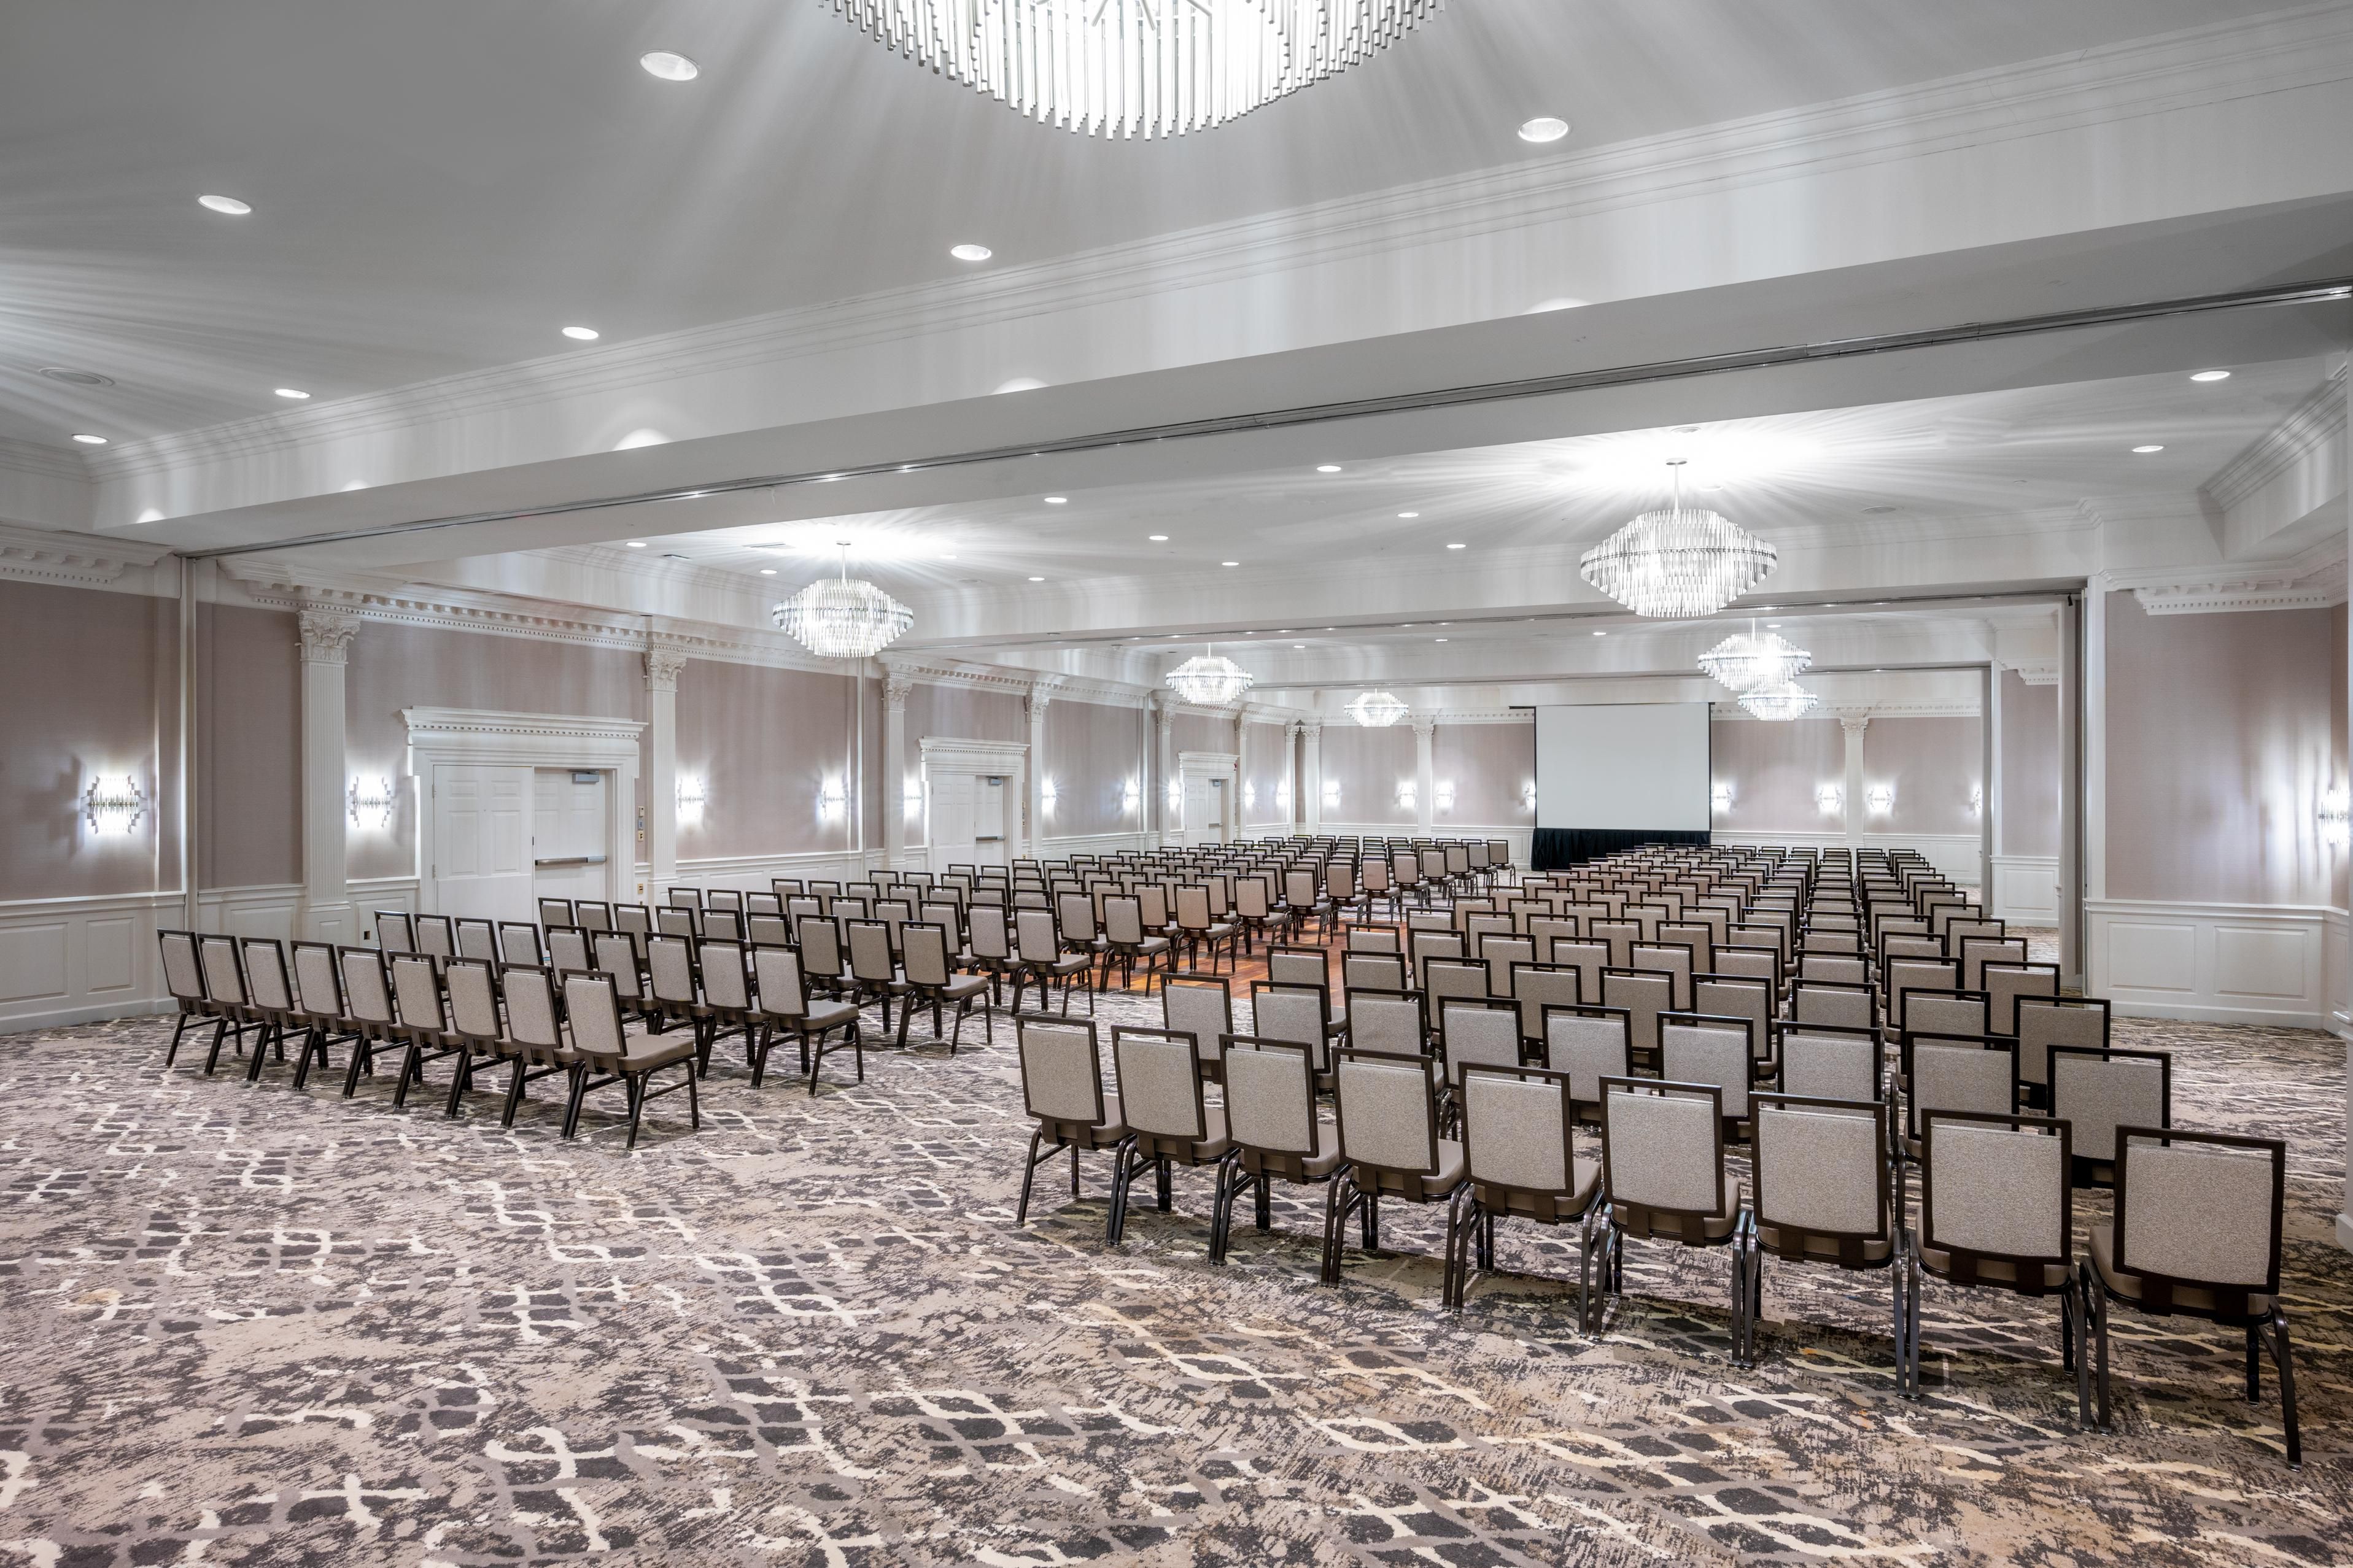 King Street Ballroom, with space for 900 guests theater style